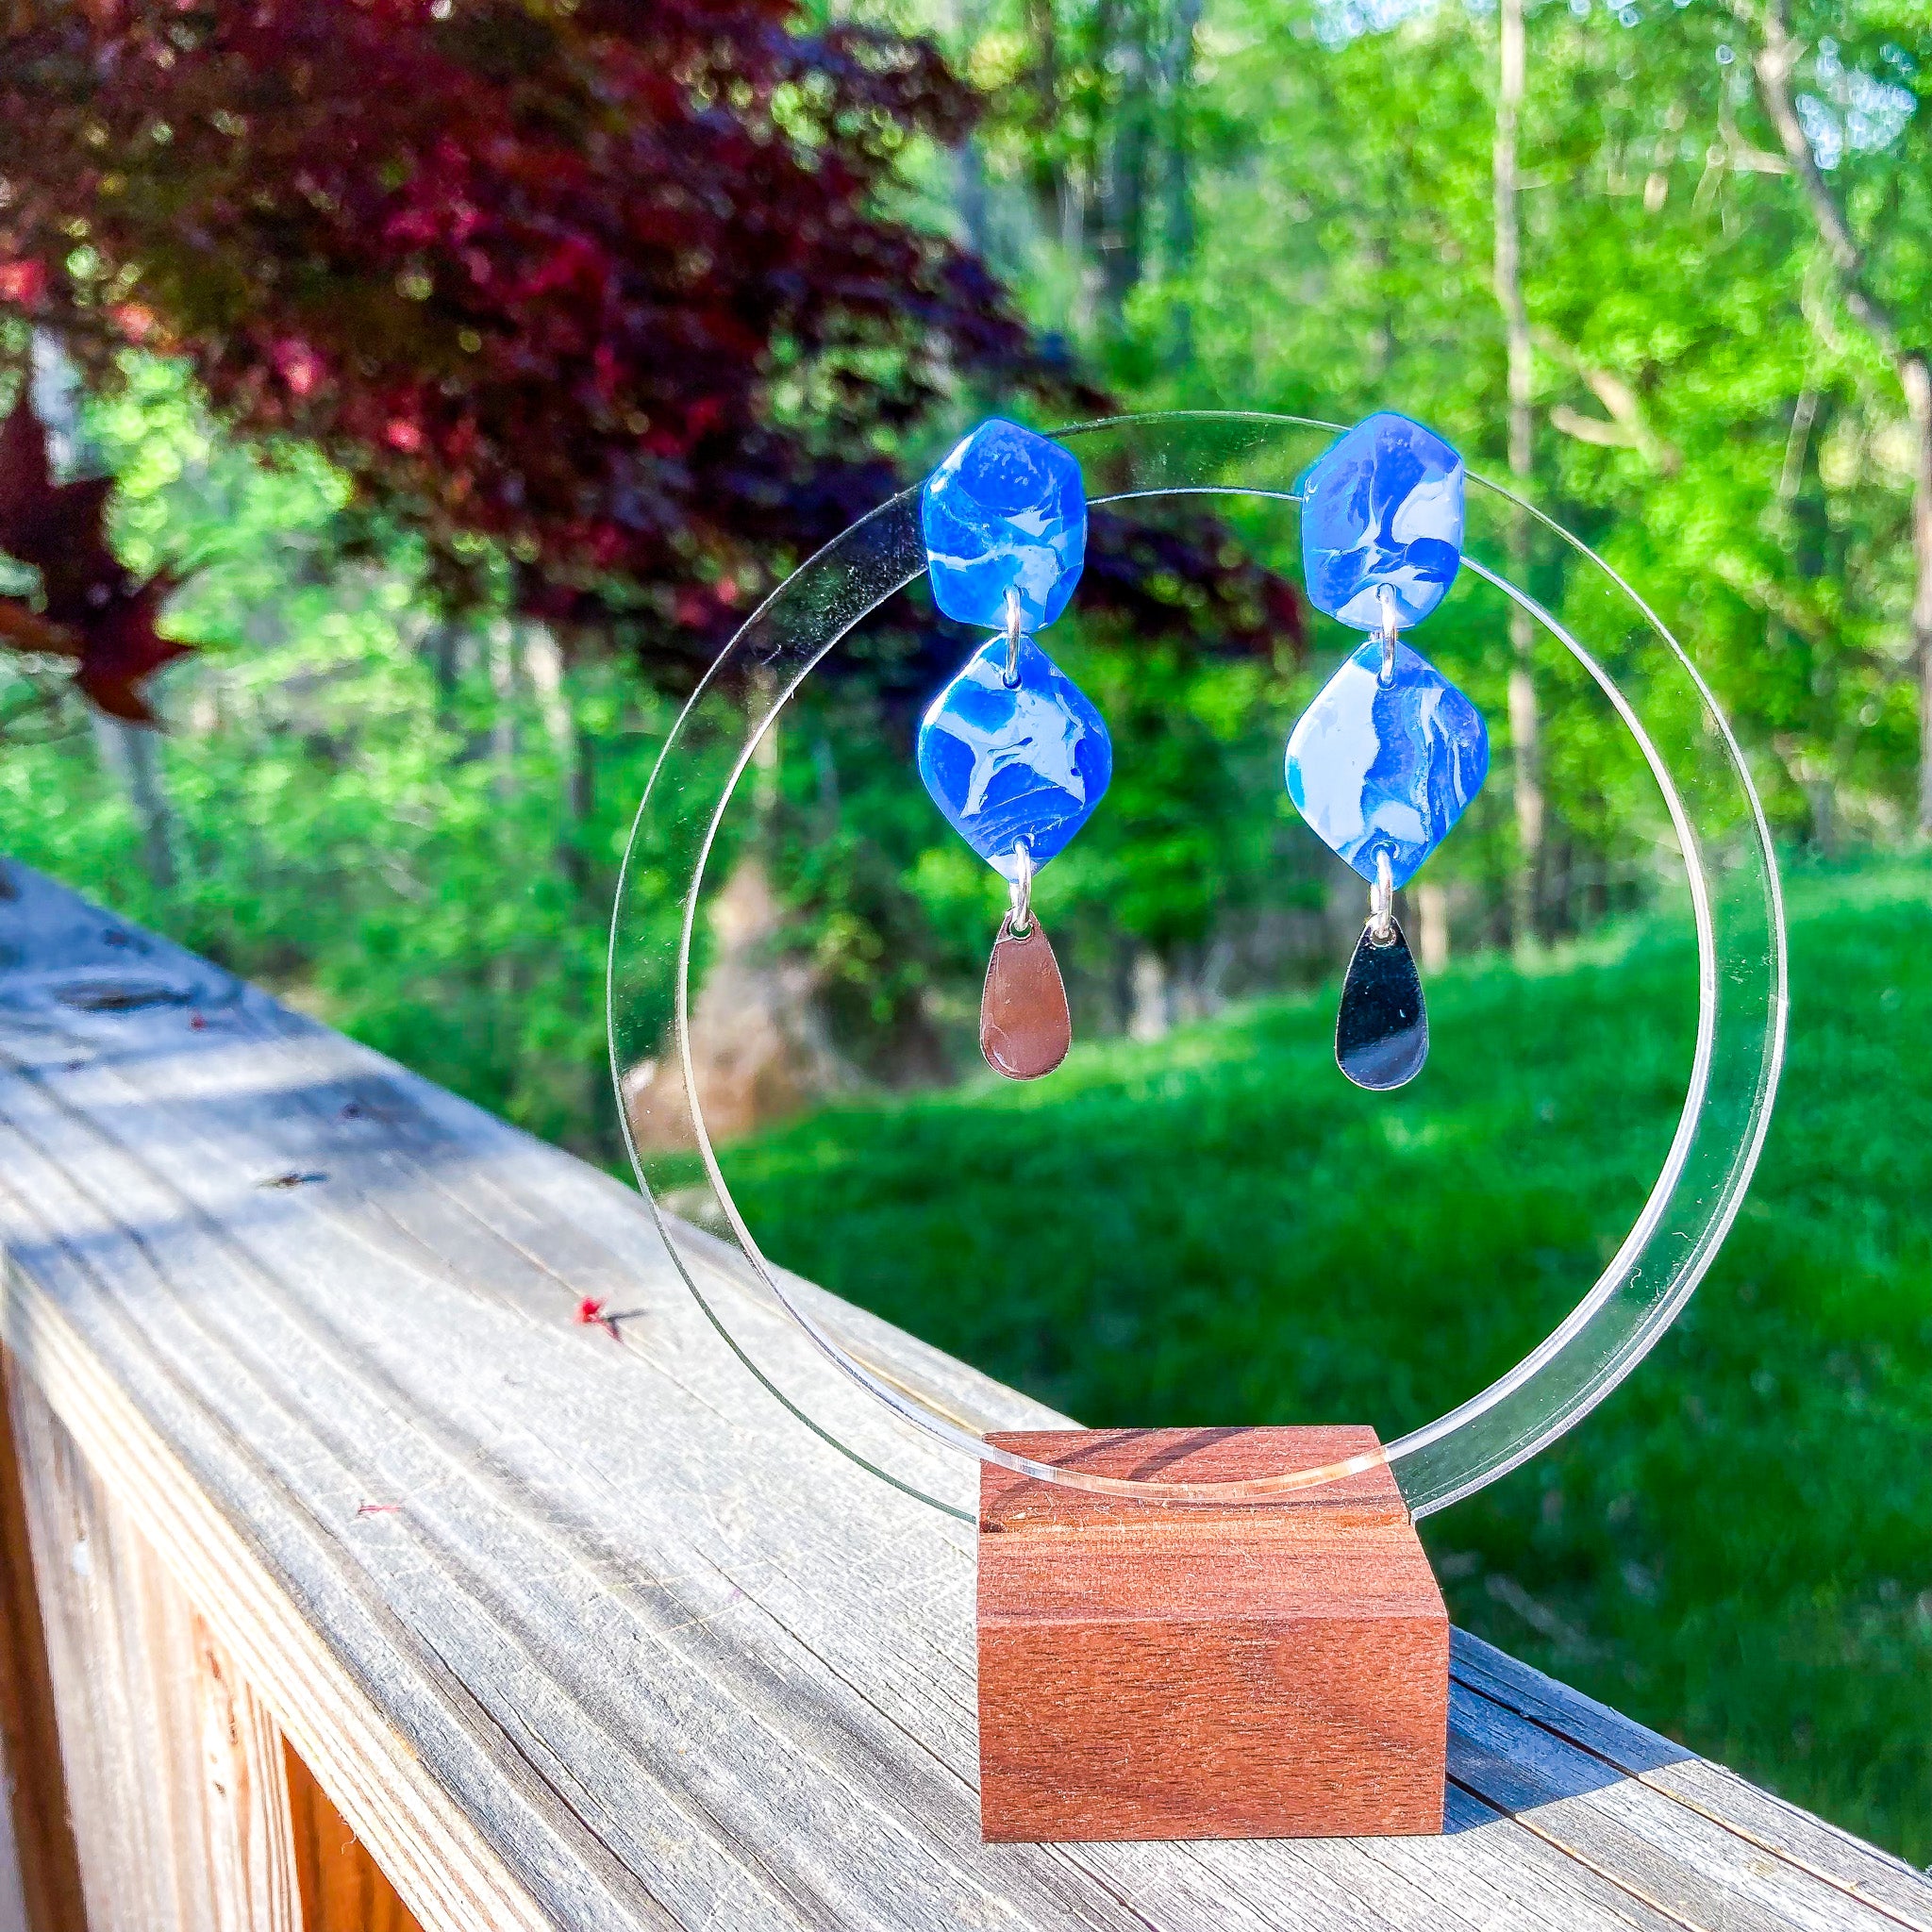 Handcrafted polymer clay earrings in marbled cornflower and sapphire blue with a silver teardrop charm, displayed on a clear acrylic circle with a warm wood base which is sitting on a fence with lush woods in the background.